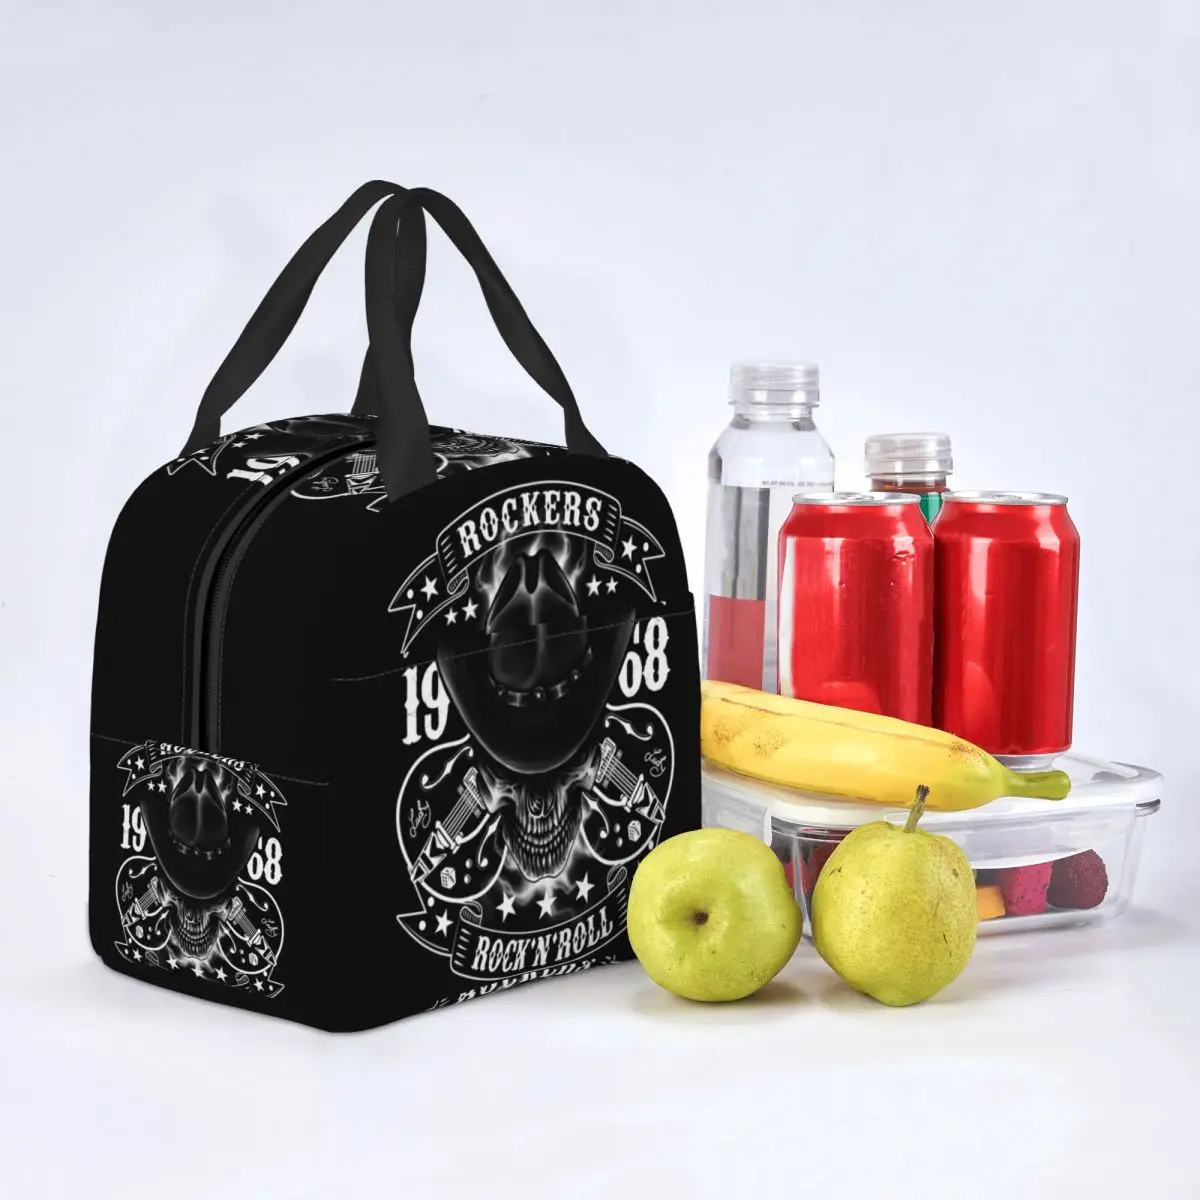 Rockabilly Skull 1968 Rockers Rock N Roll Guitars Bikers Thermal Insulated Lunch Bags Women Resuable Lunch Container Food Box images - 6